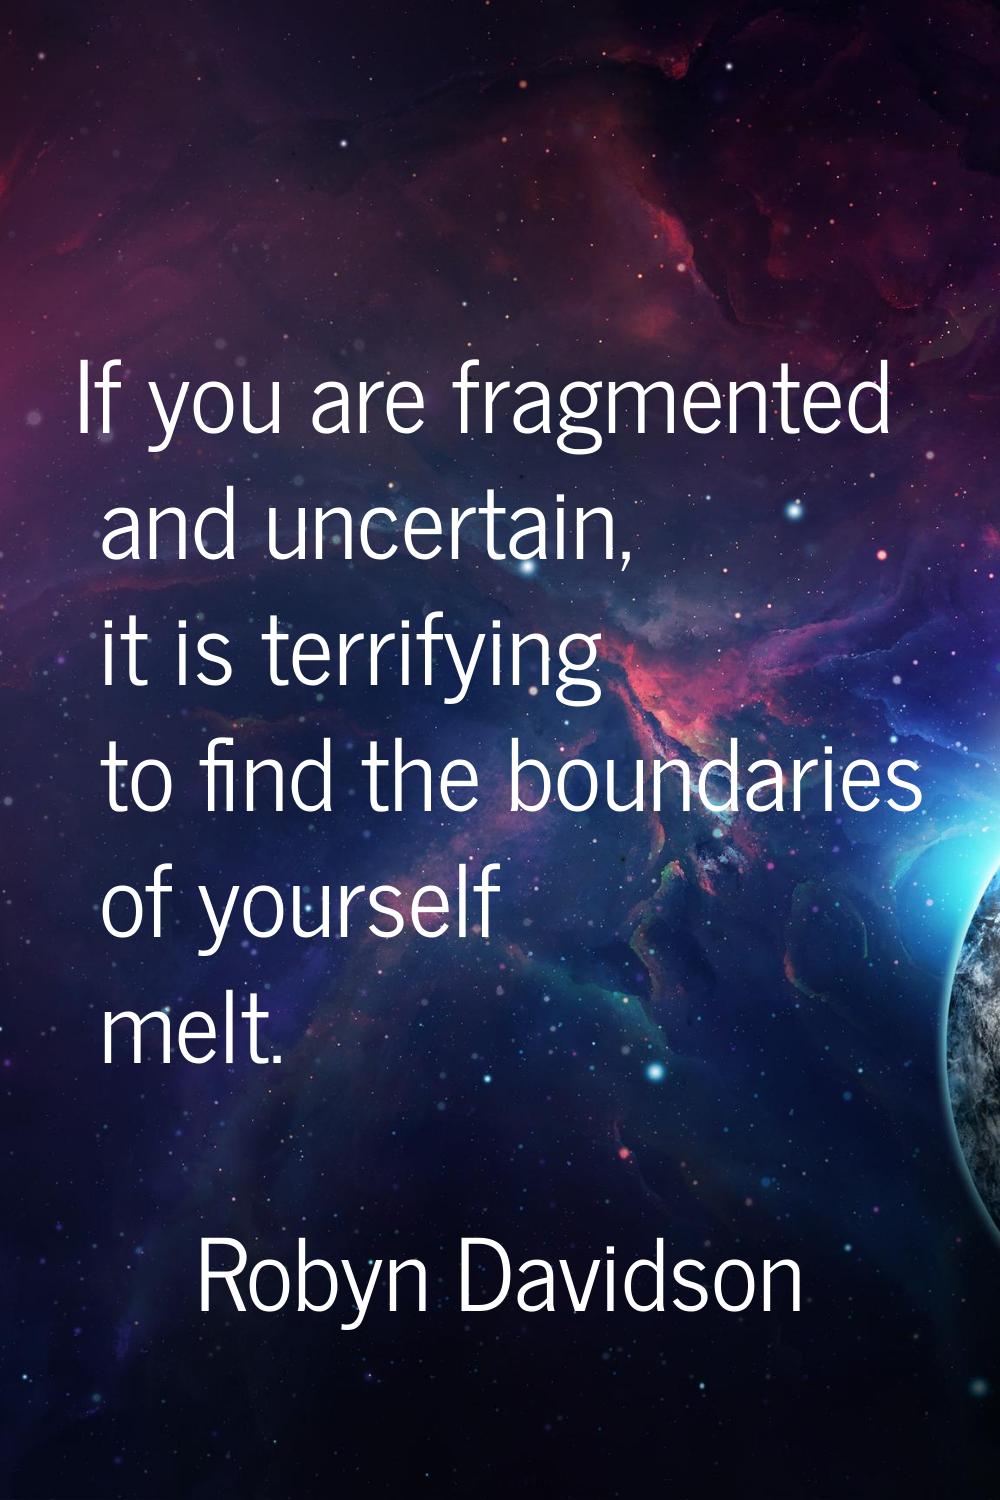 If you are fragmented and uncertain, it is terrifying to find the boundaries of yourself melt.